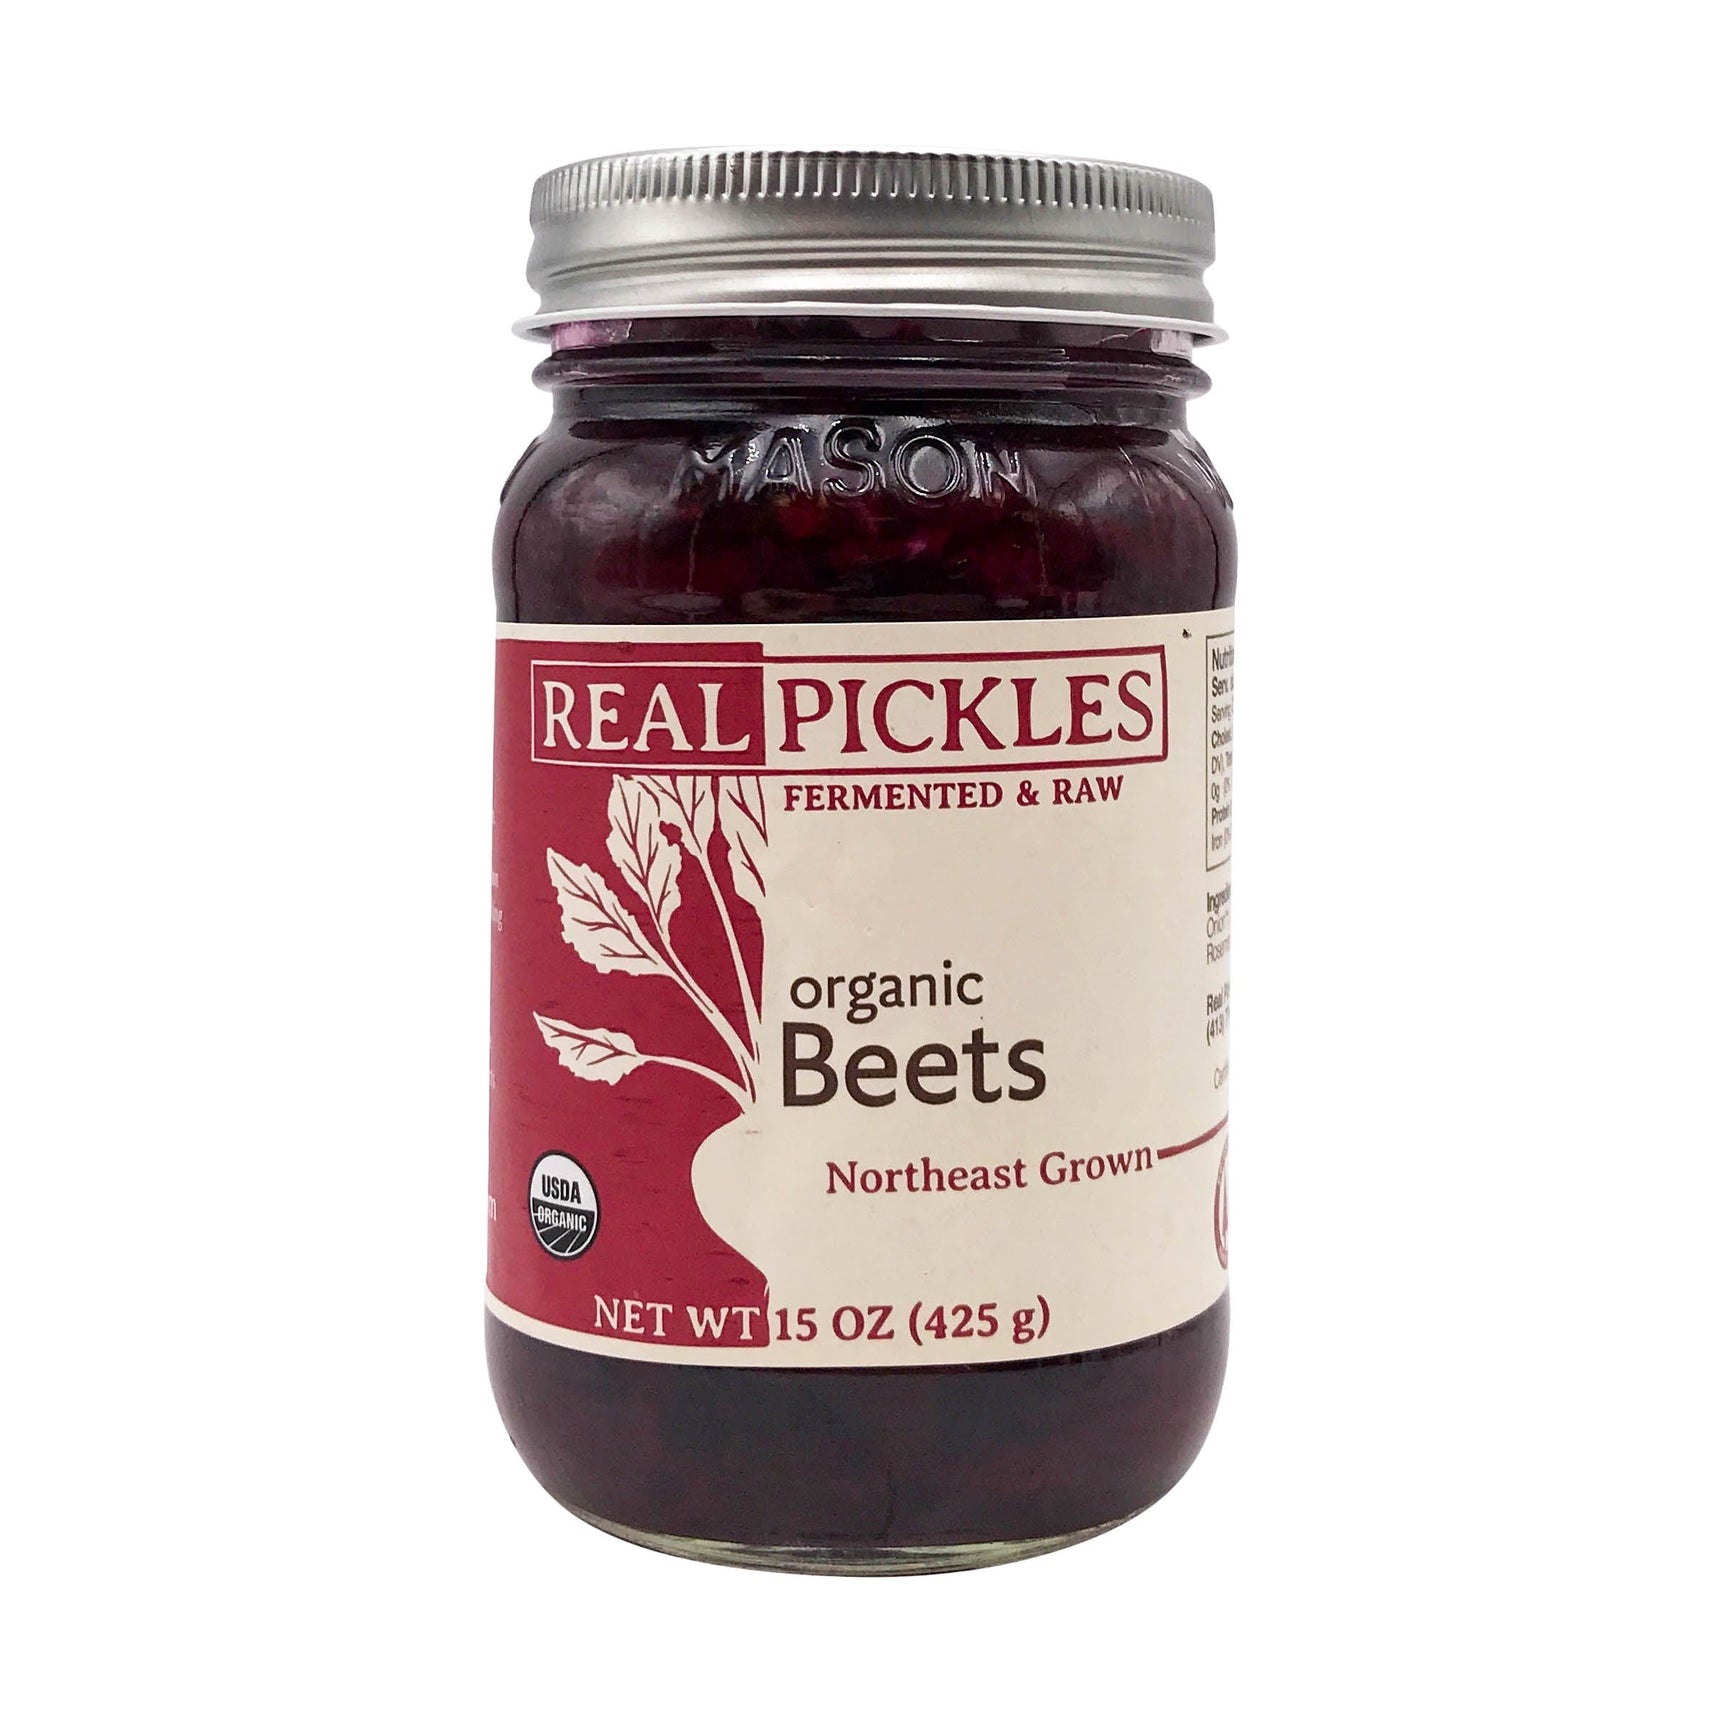 Real Pickles: Organic Beets